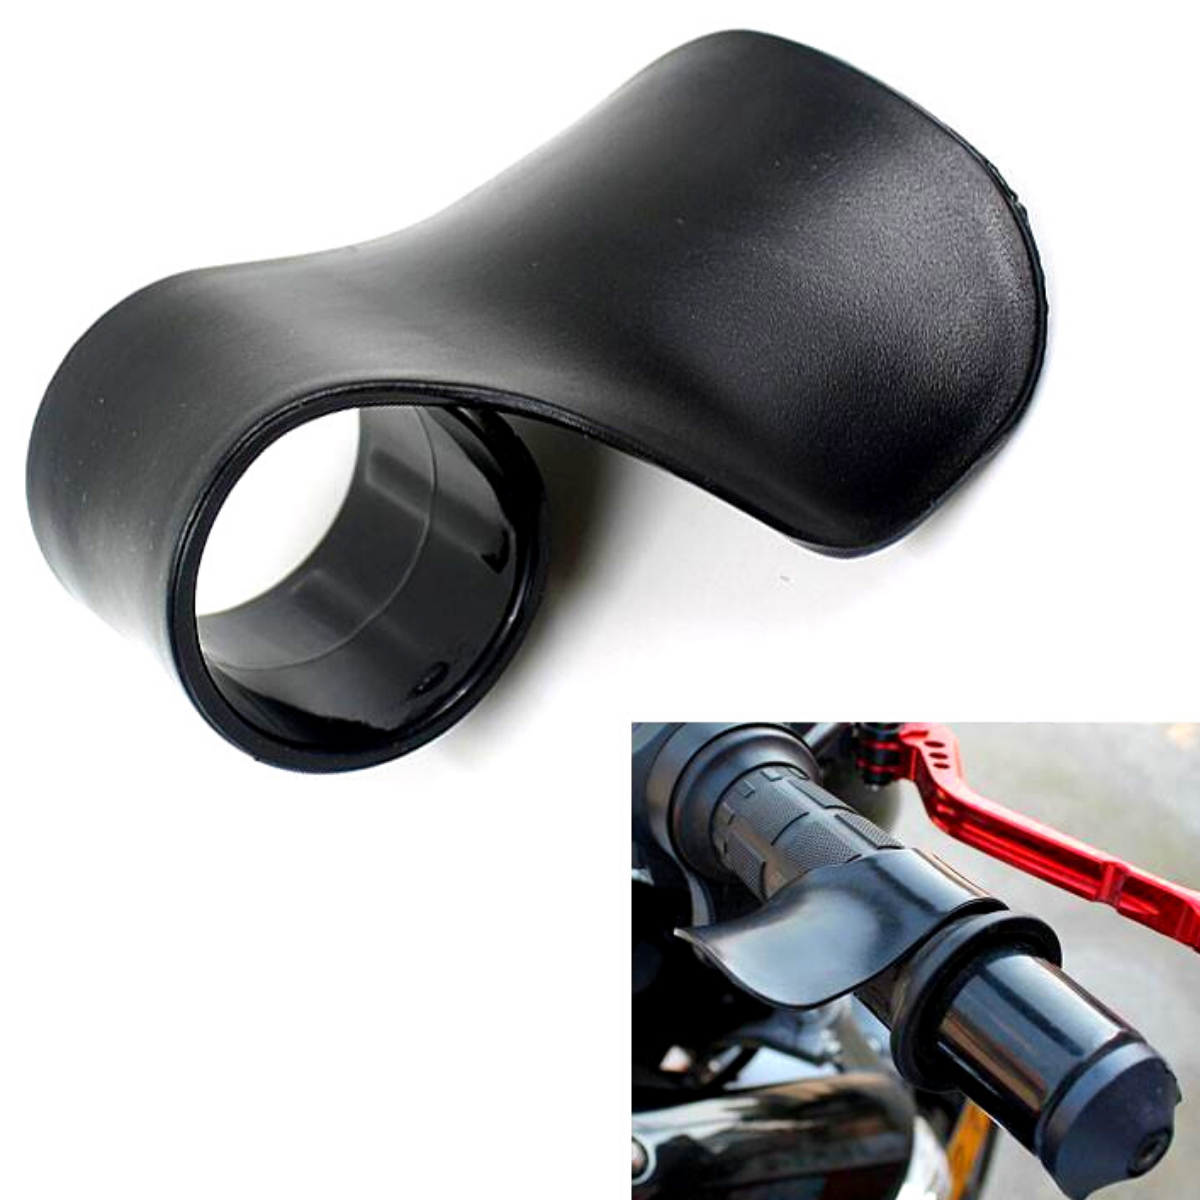 cruise control motorcycle throttle